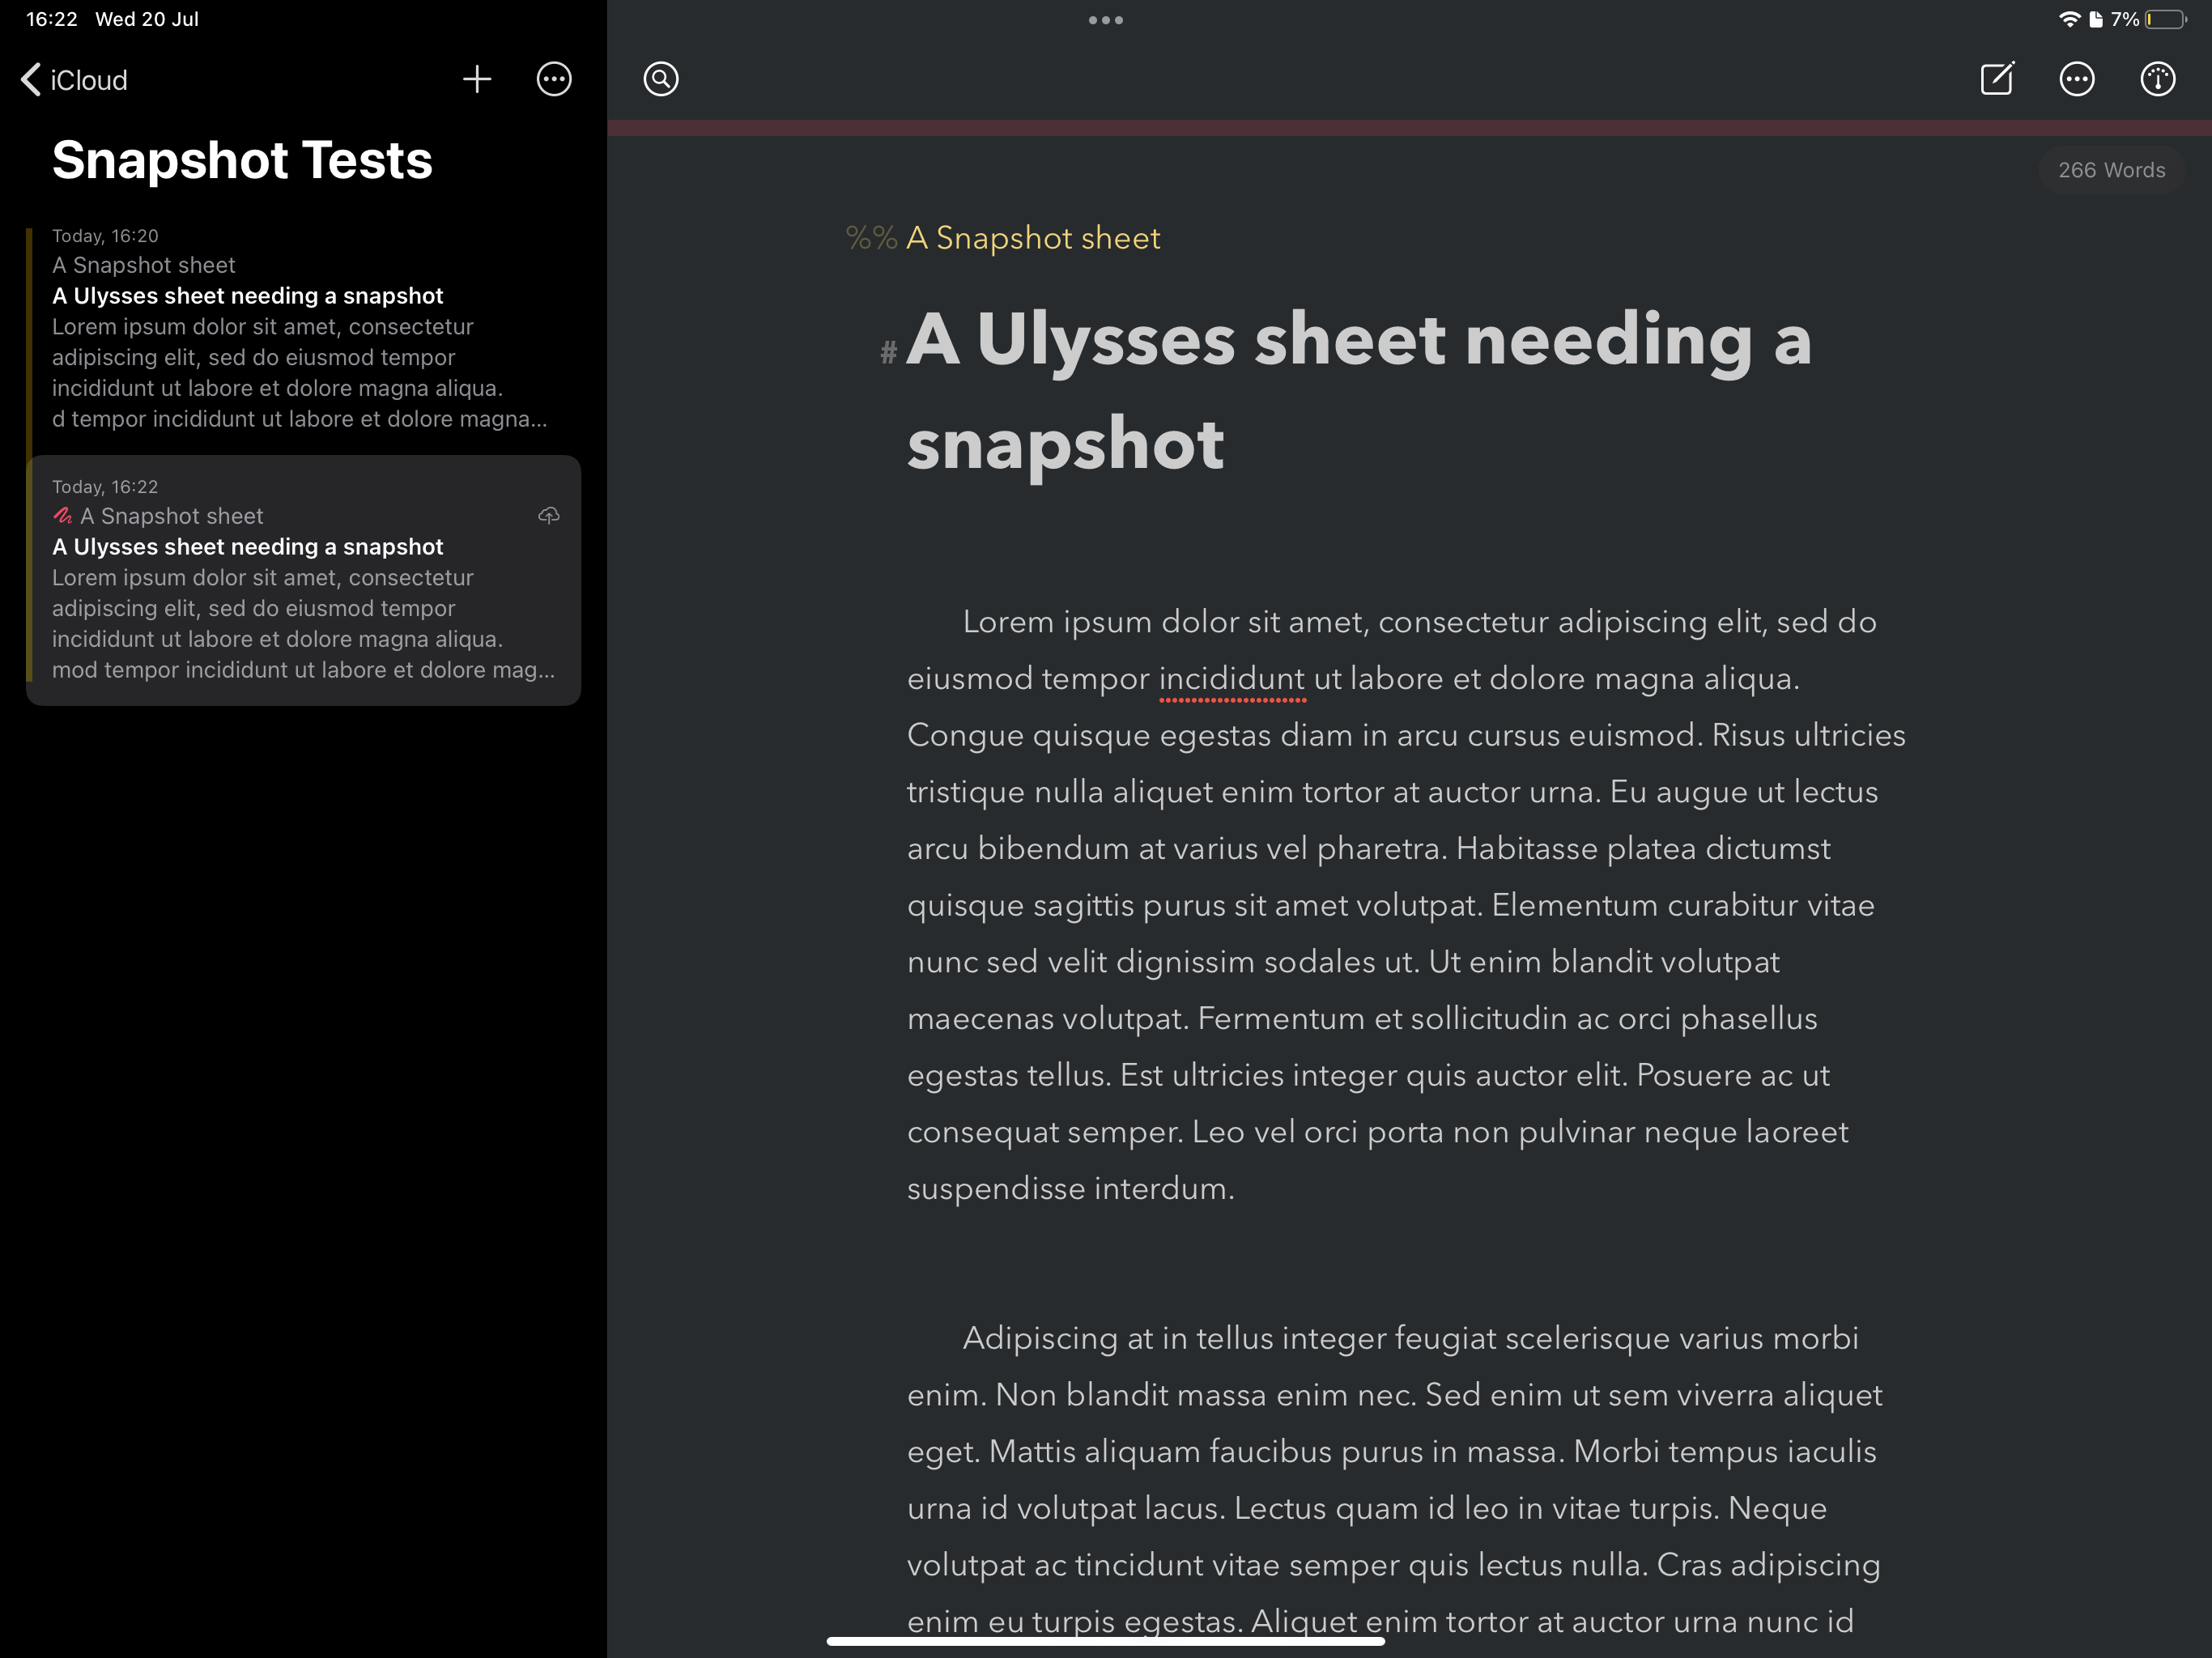 Gluing Snapshot Sheets to their original in Ulysses